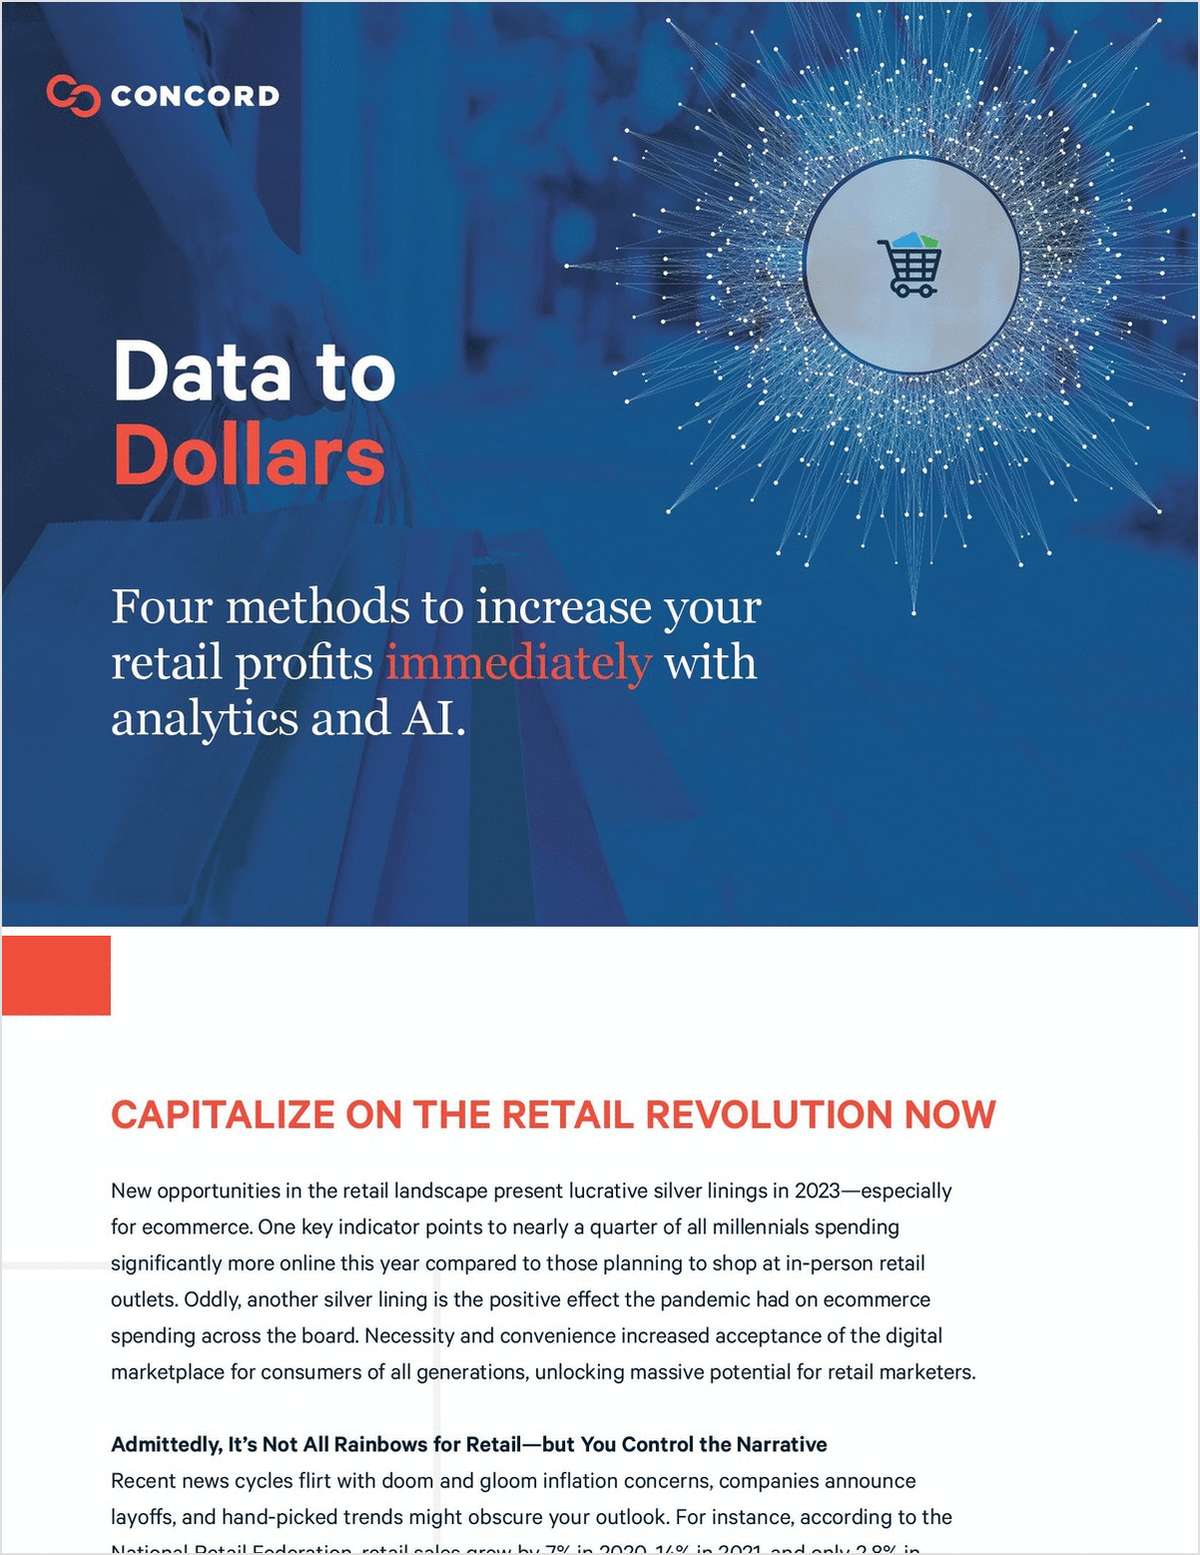 4 Methods to Increase Your Profits this Year with Analytics and AI